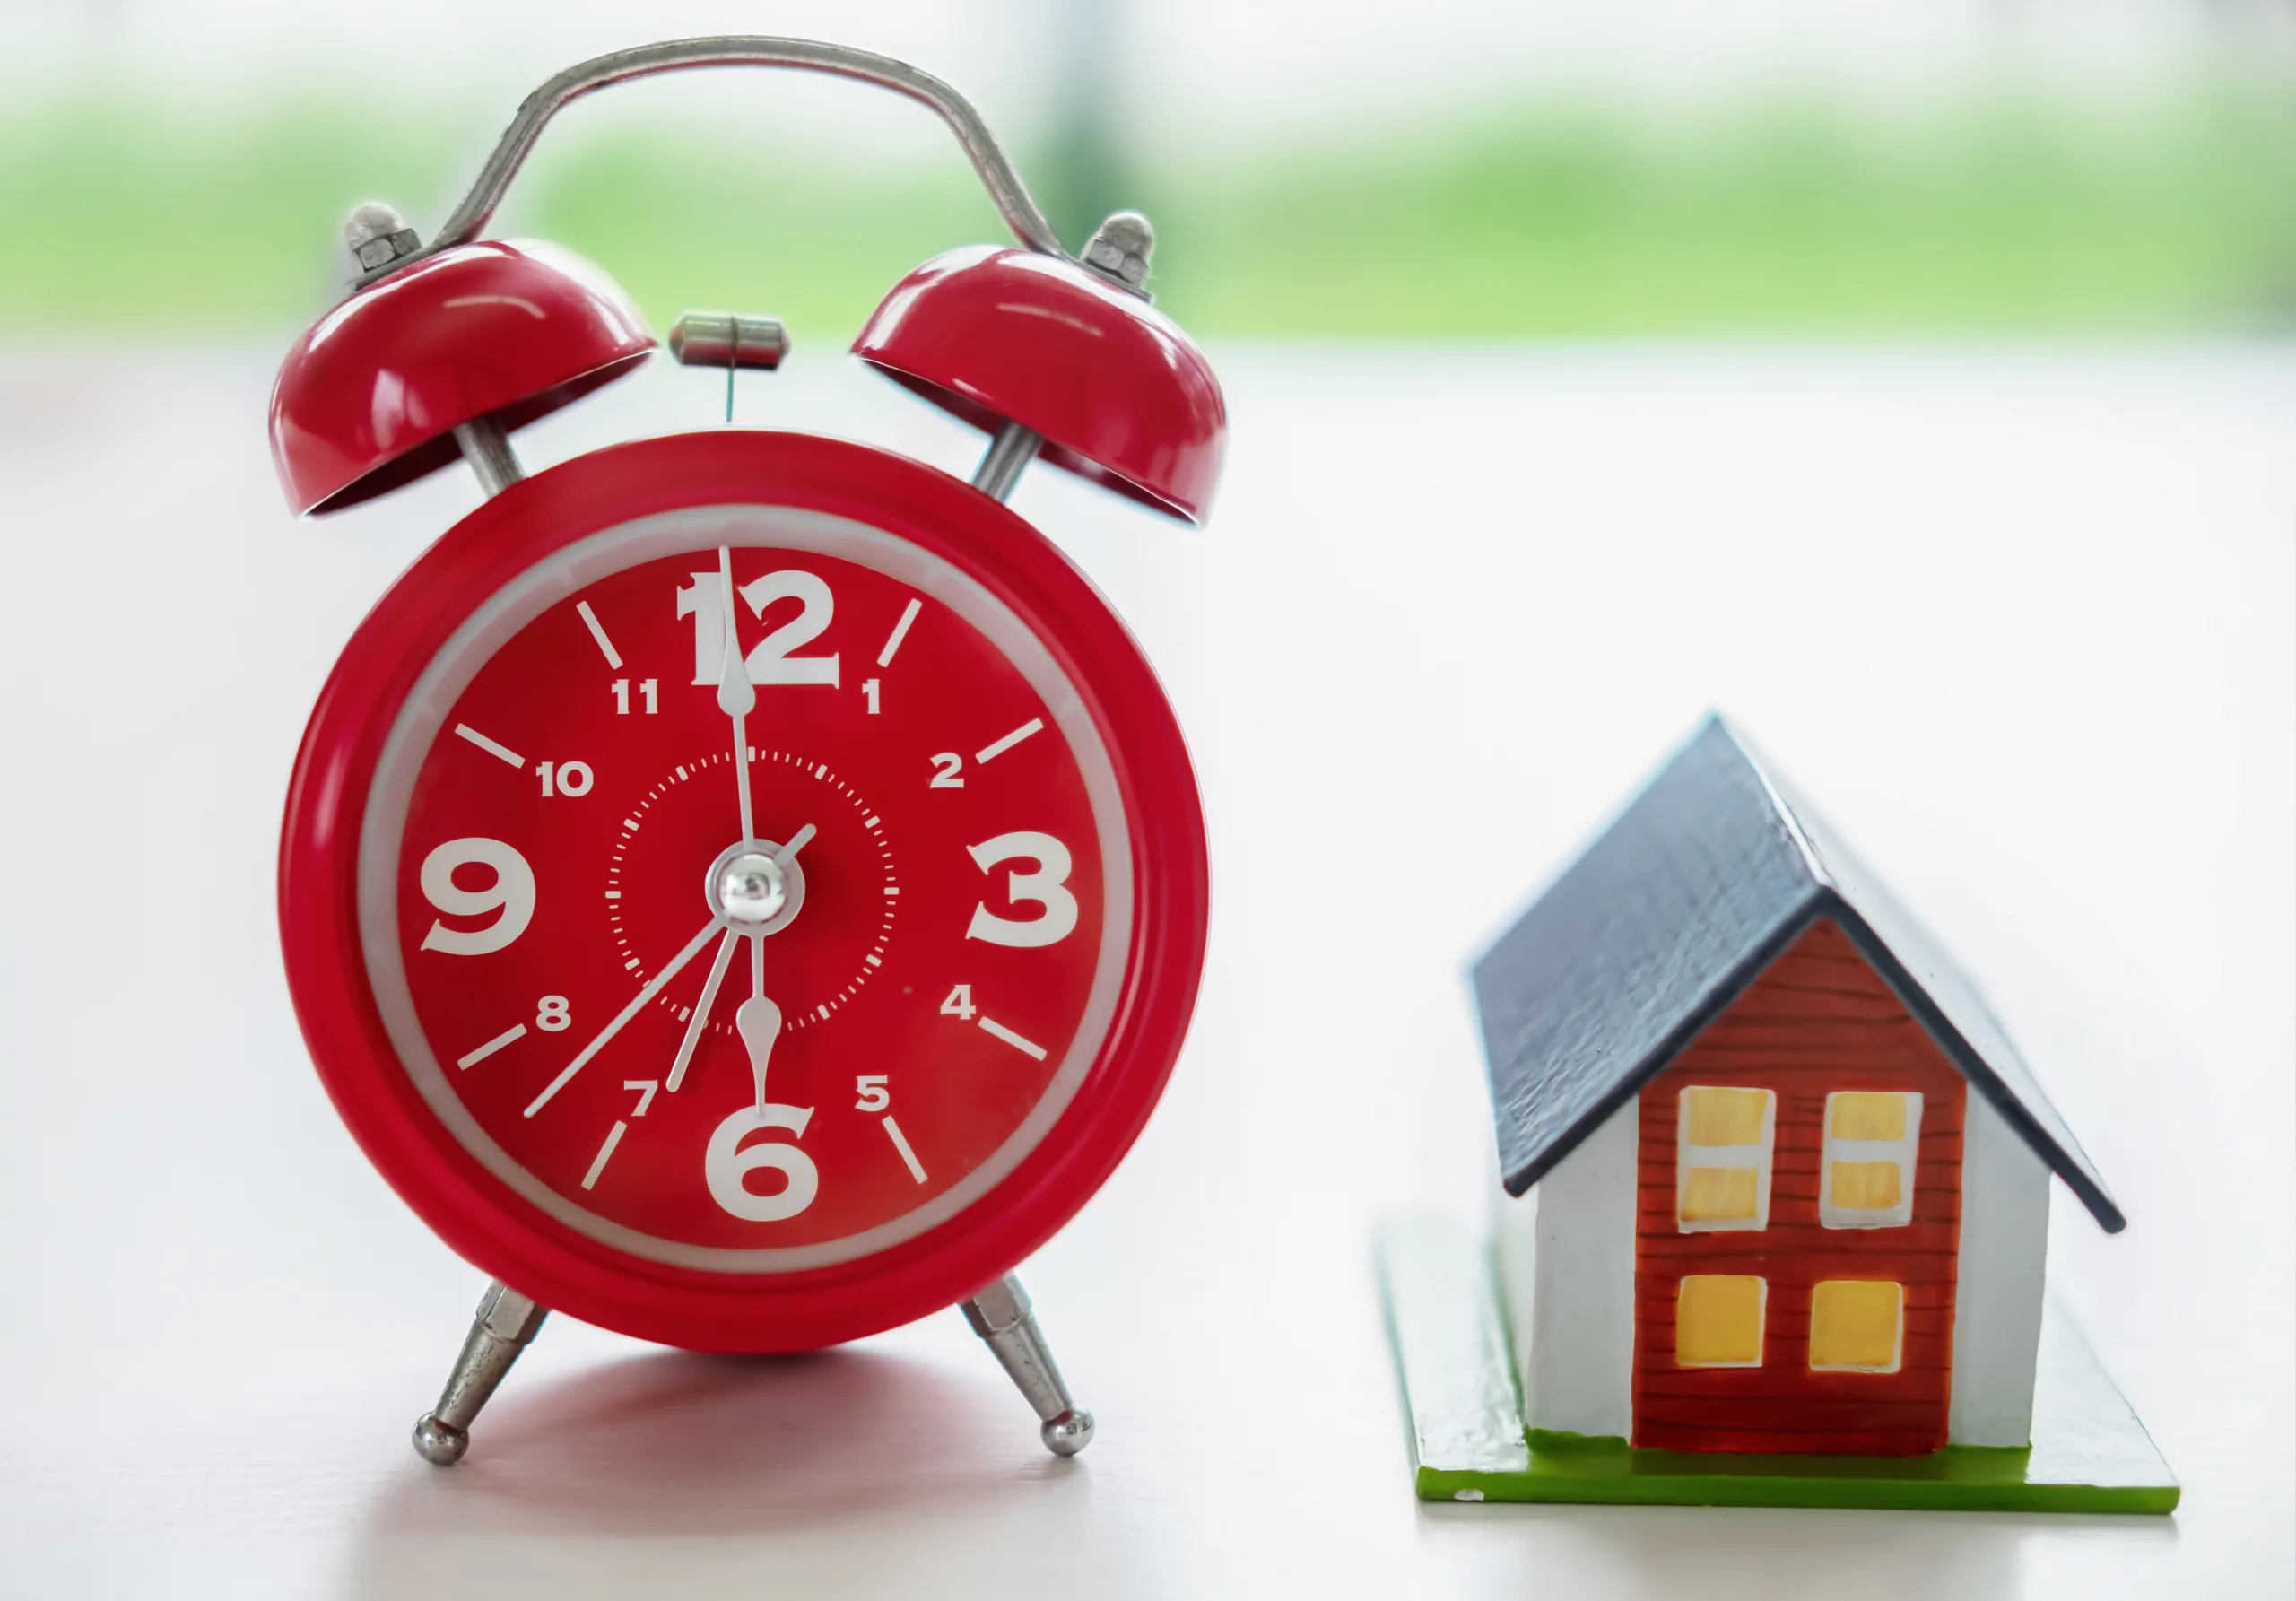 Schedule Your New Roof; Time Is Running Out